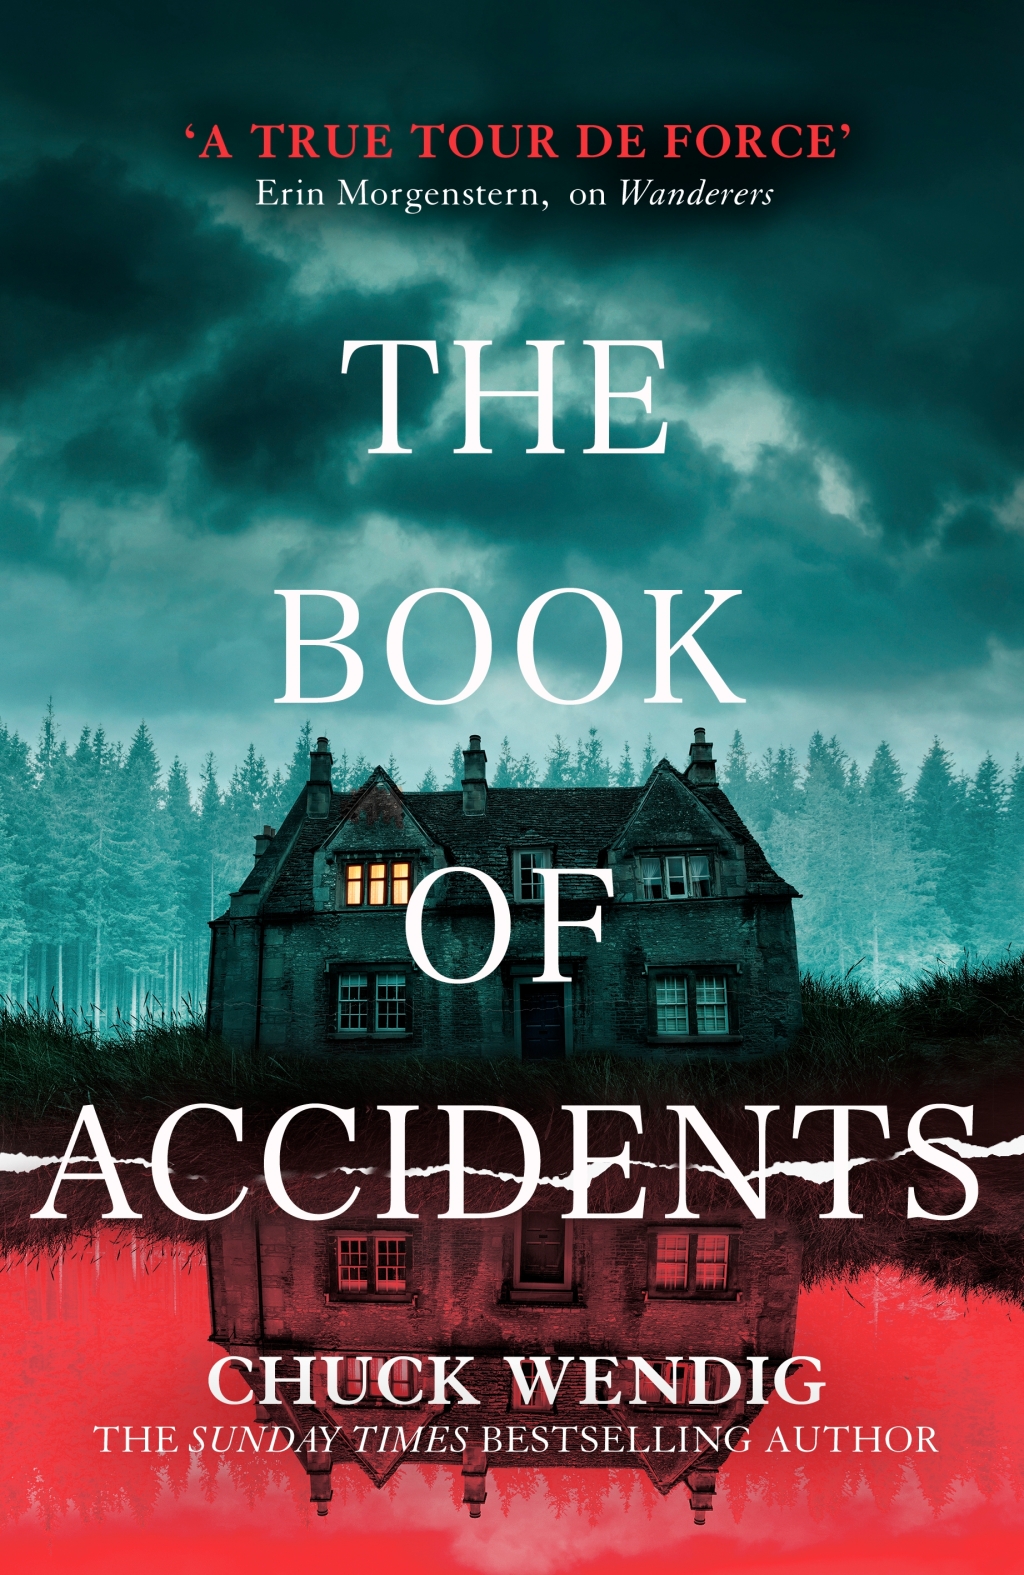 On reading: The Book of Accidents by Chuck Wendig